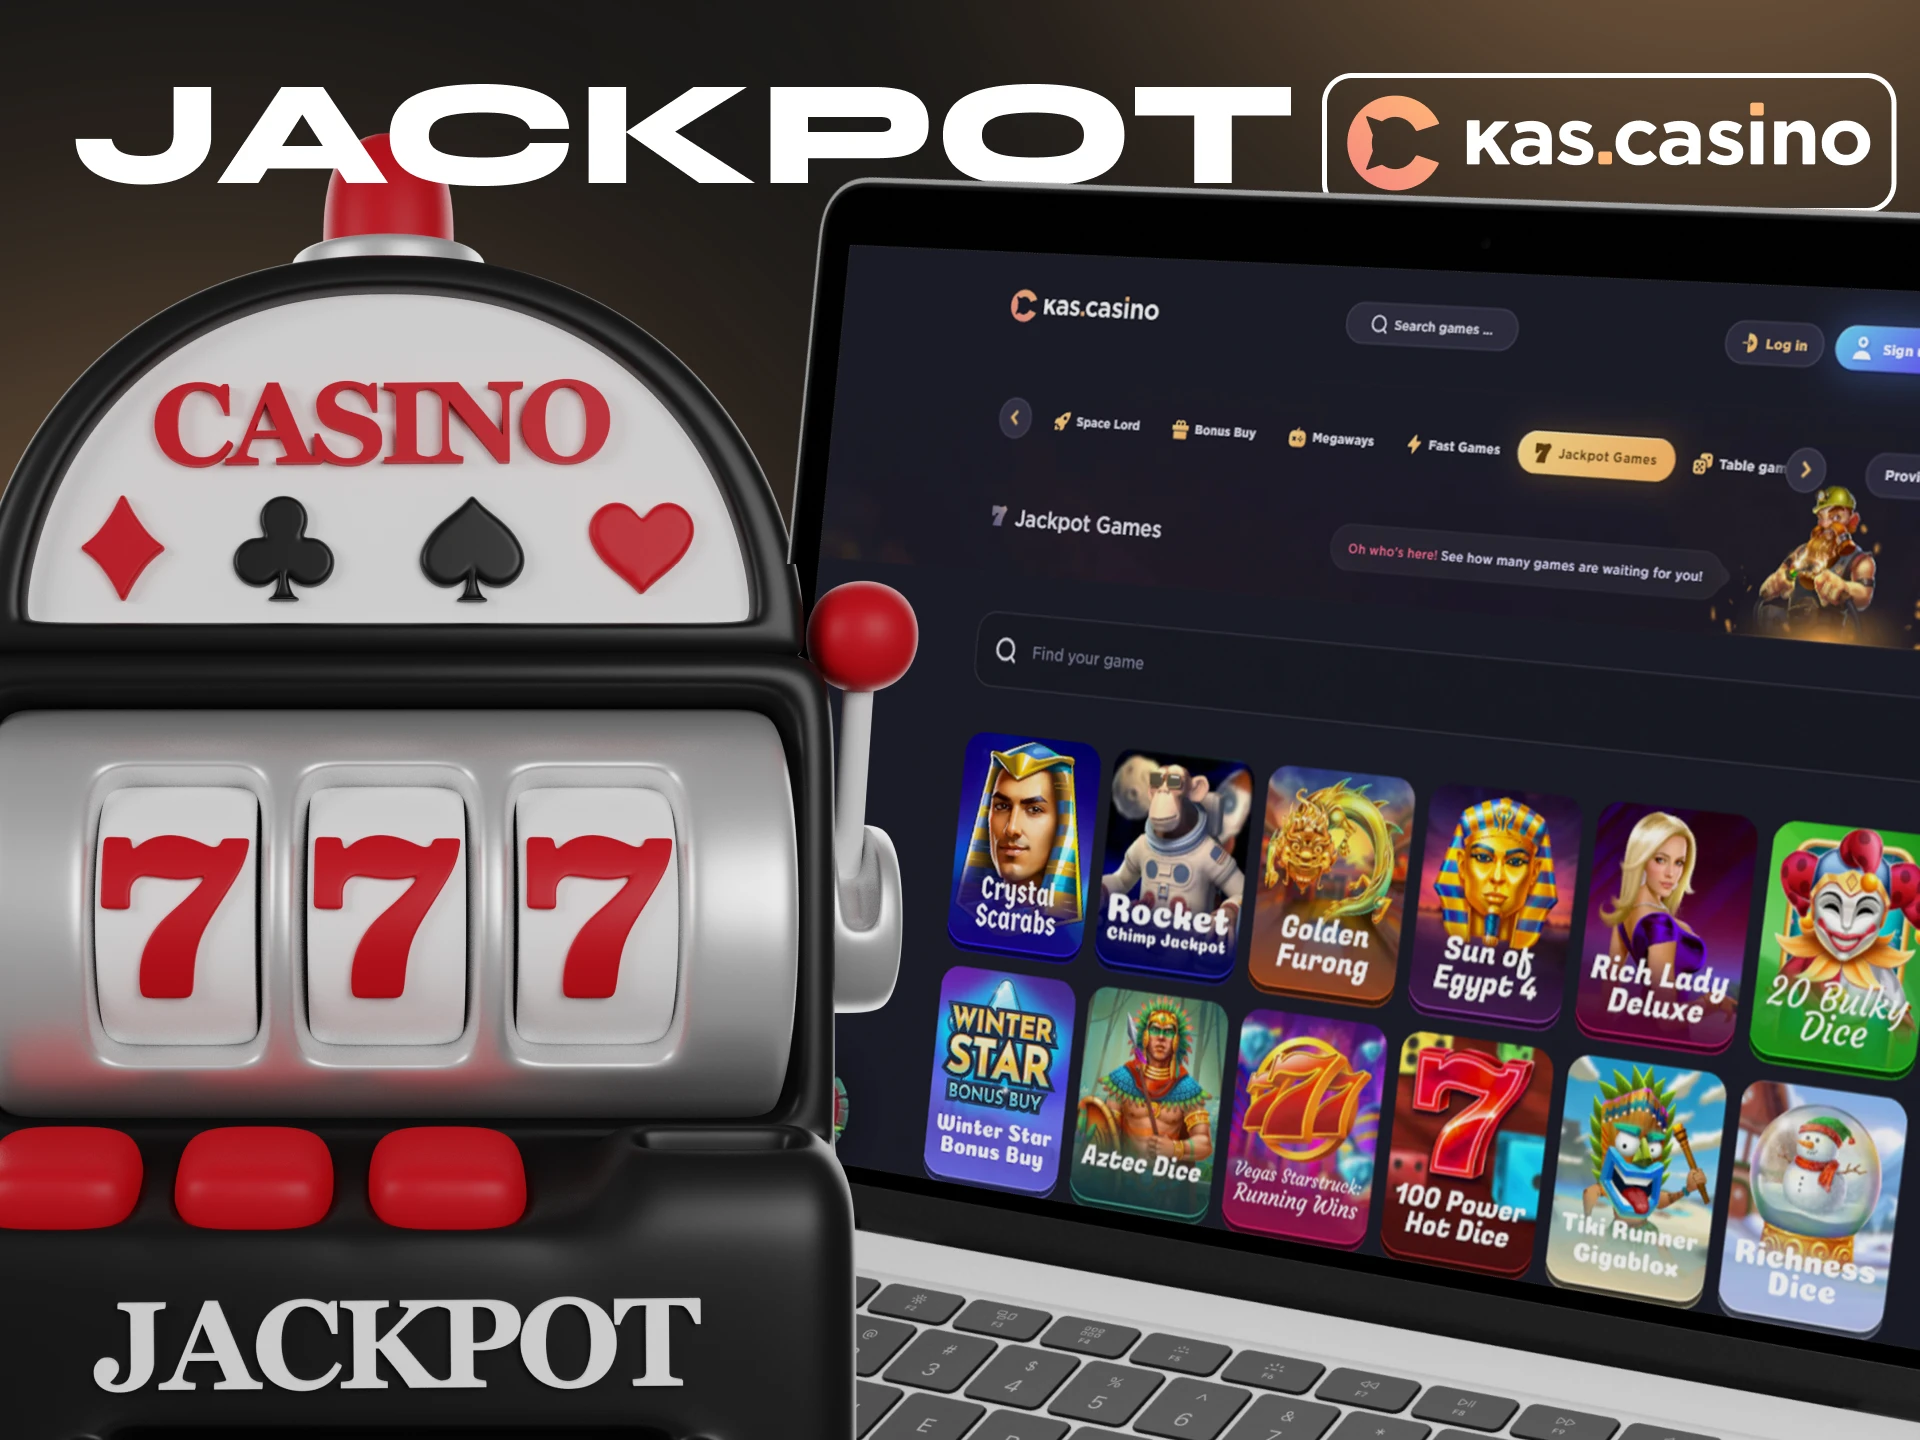 You can expect to win big in the jackpot games at Kas Casino.